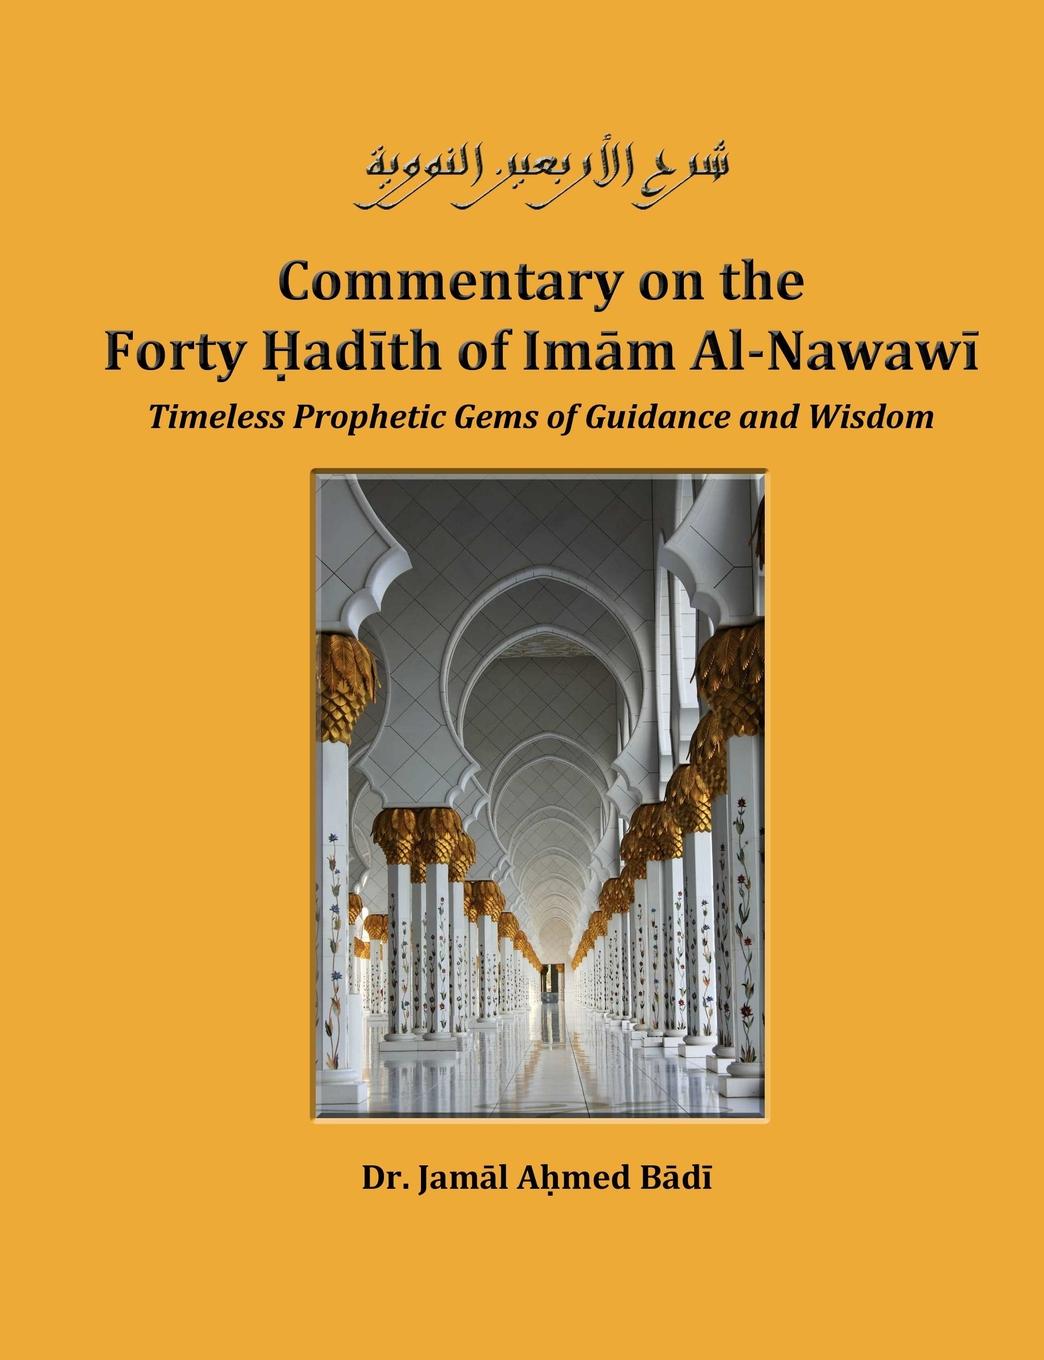 Dr. Jamal Ahmed Badi Commentary on the Forty Hadith of Imam Al-Nawawi - Timeless Prophetic Gems of Guidance and Wisdom